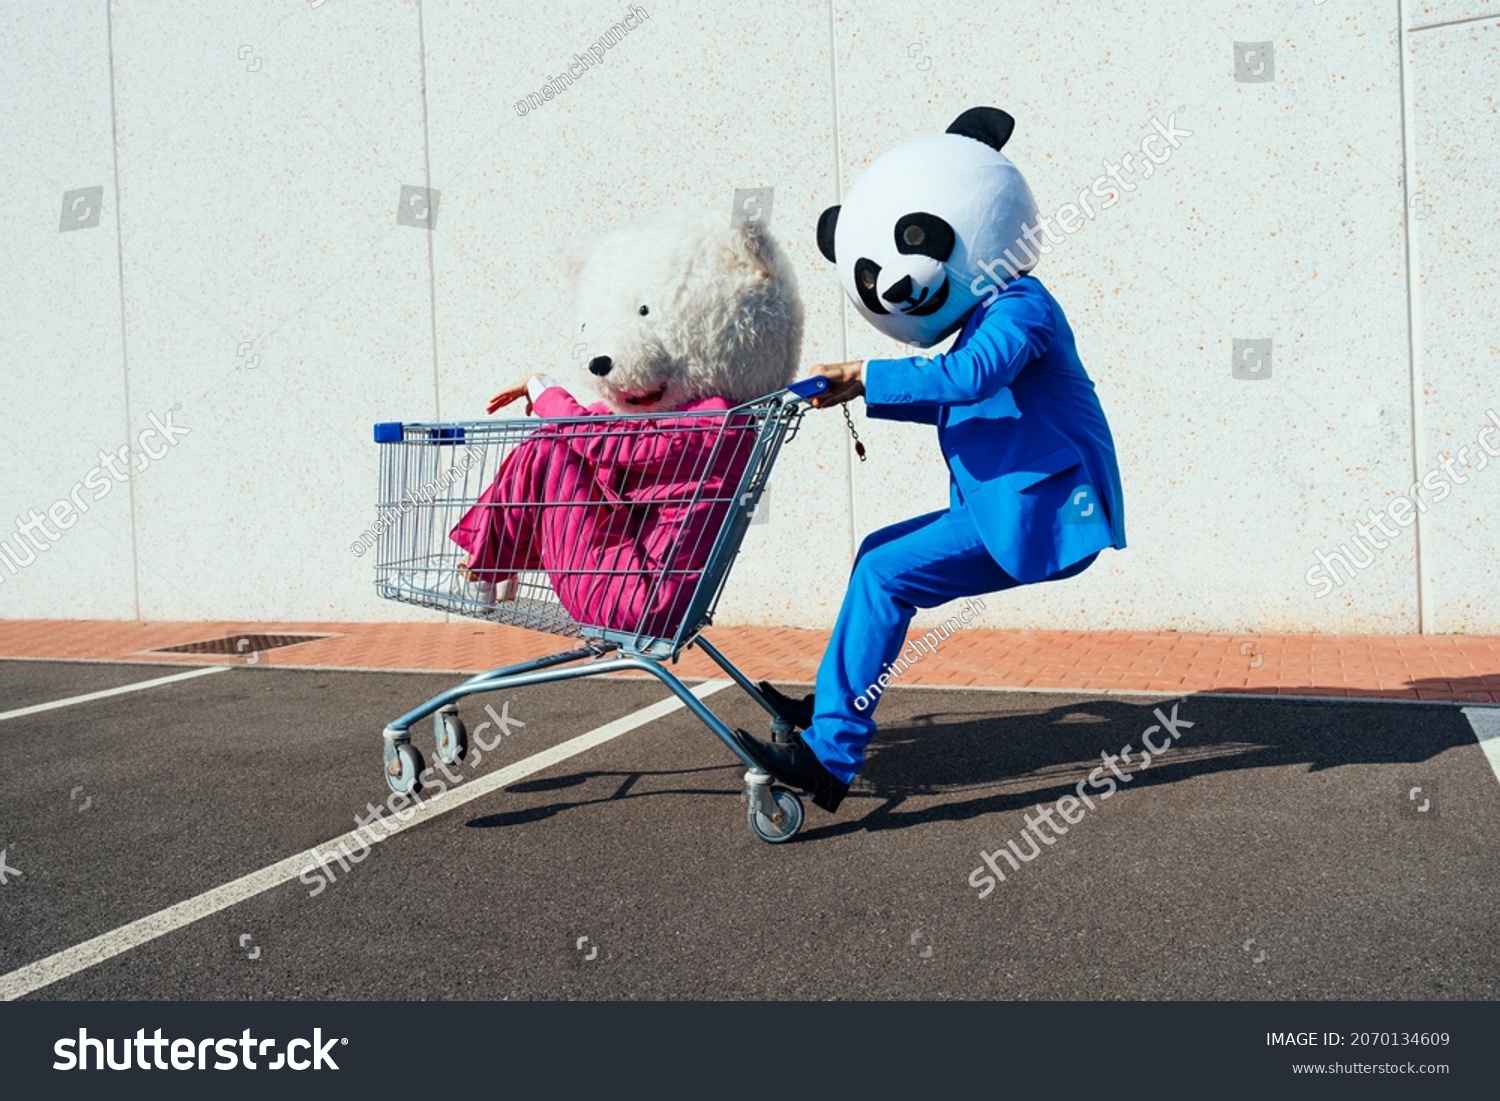 Storytelling image of a couple wearing giant panda head and colored suits. Man and woman making party in a parking lot. #2070134609